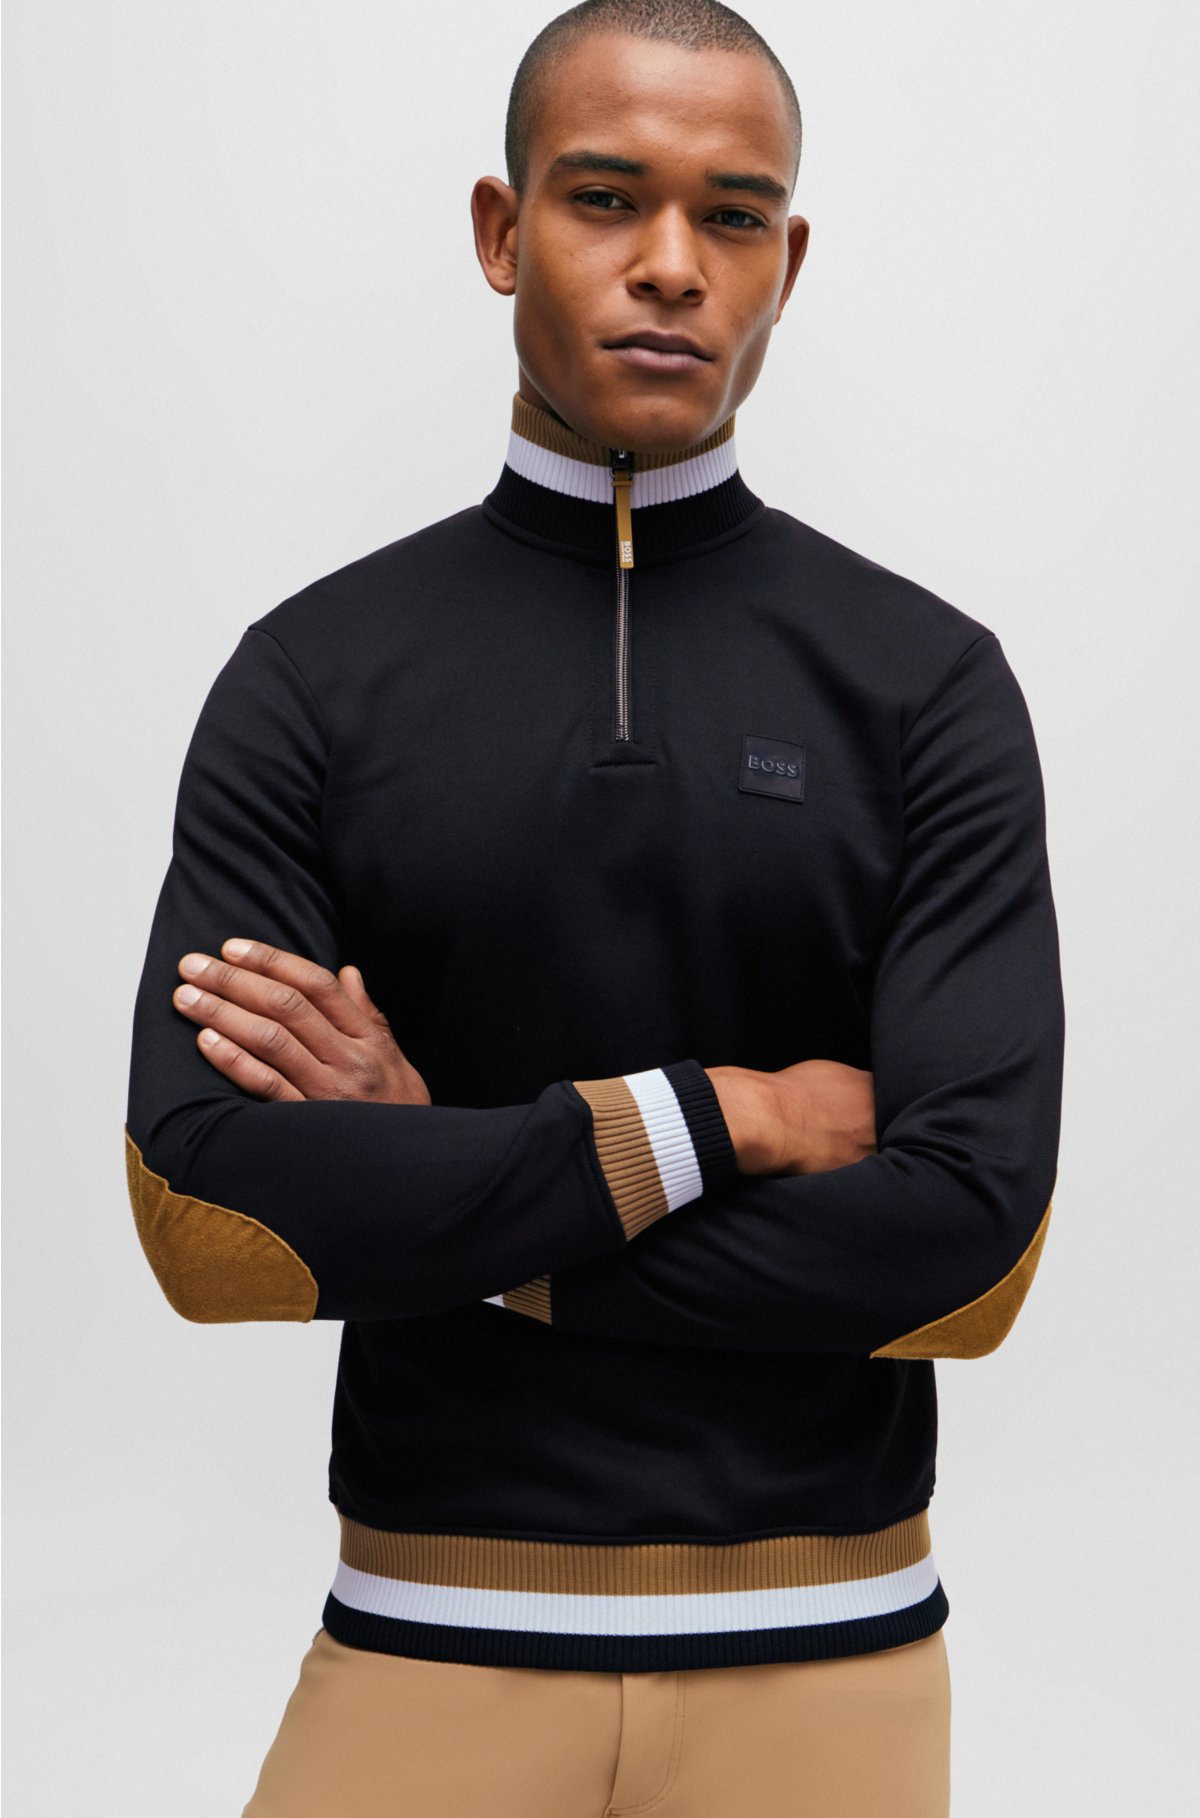 Equestrian sweater in black with signature stripes and logos, Black